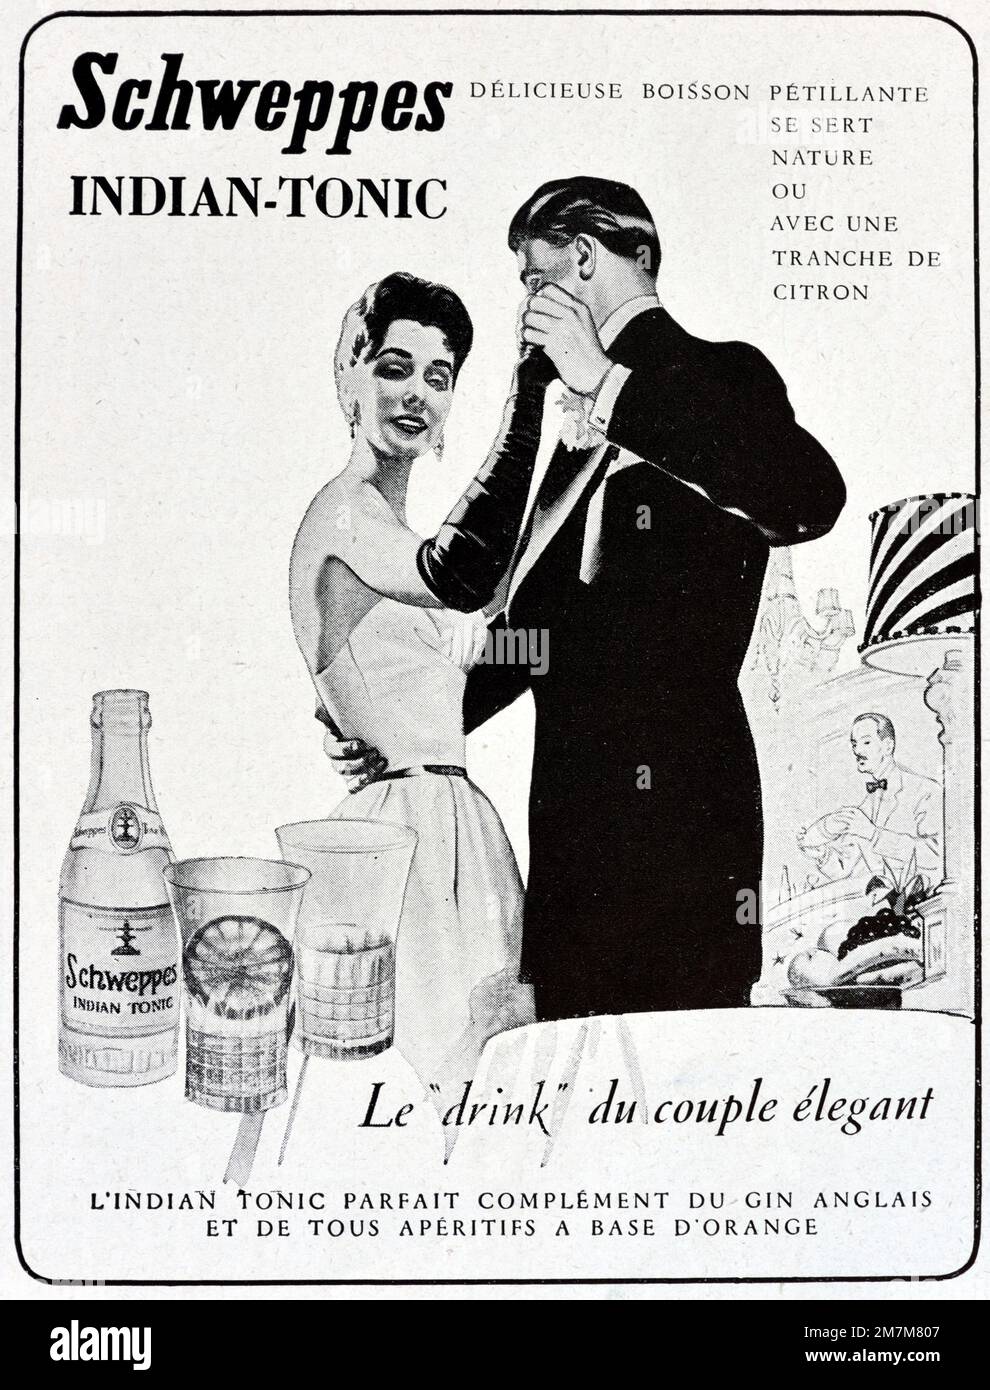 Vintage or Old Advert, Advertisement, Publicity or Illustration for Schweppes Indian Tonic Advert 1956 with Elegant Young Couple in Formal Dress Dancing or 1950s Fashion Stock Photo